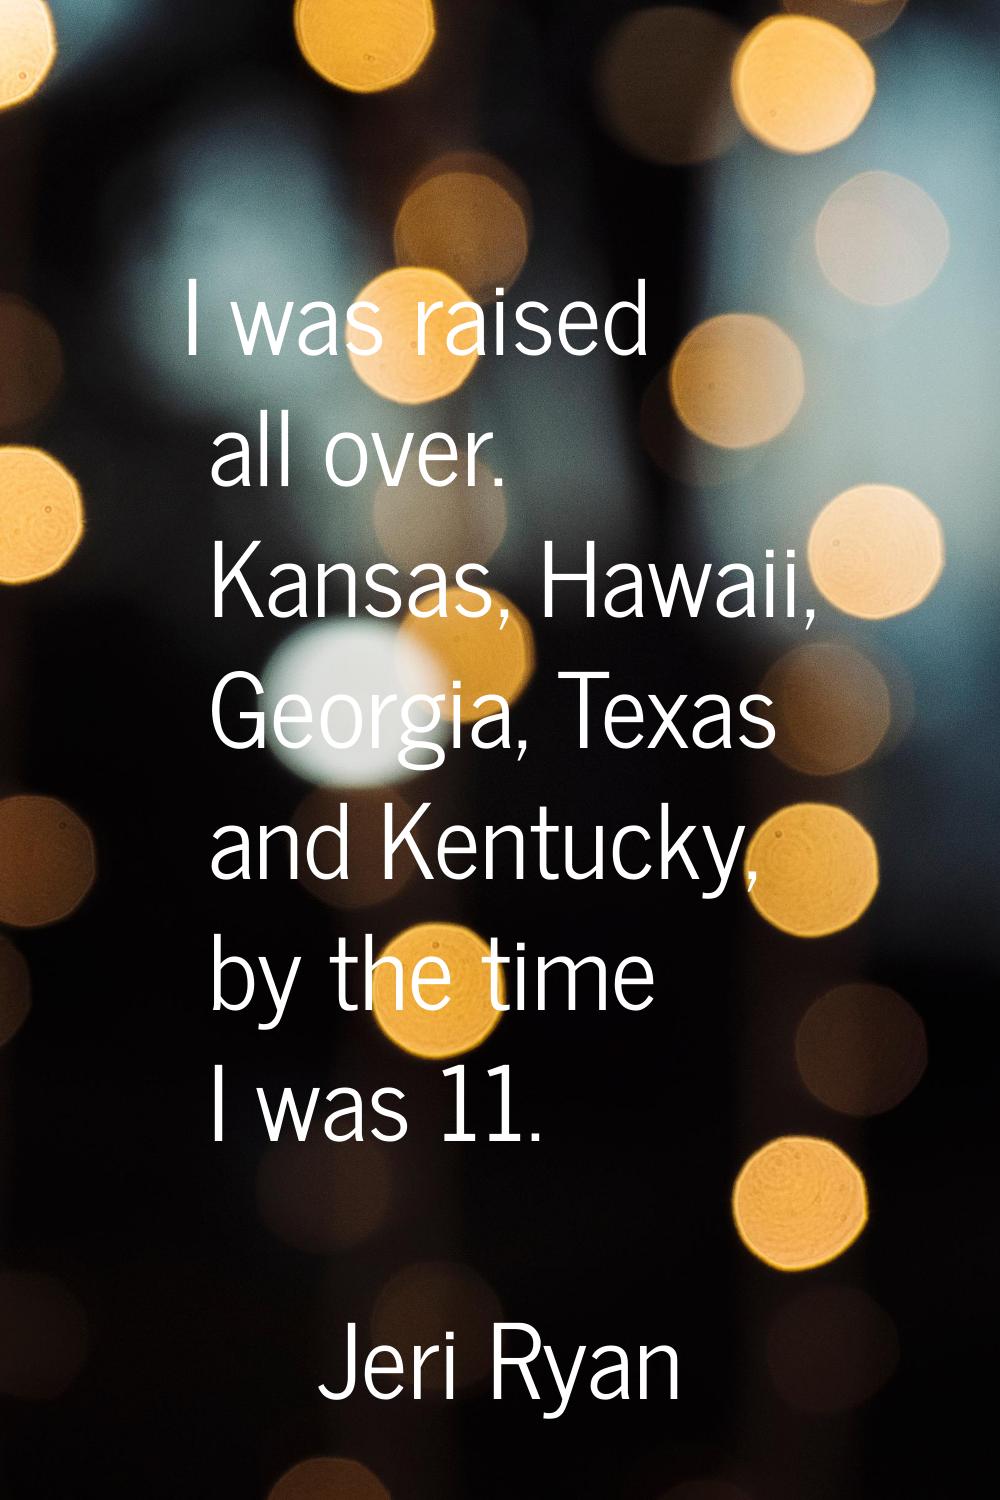 I was raised all over. Kansas, Hawaii, Georgia, Texas and Kentucky, by the time I was 11.